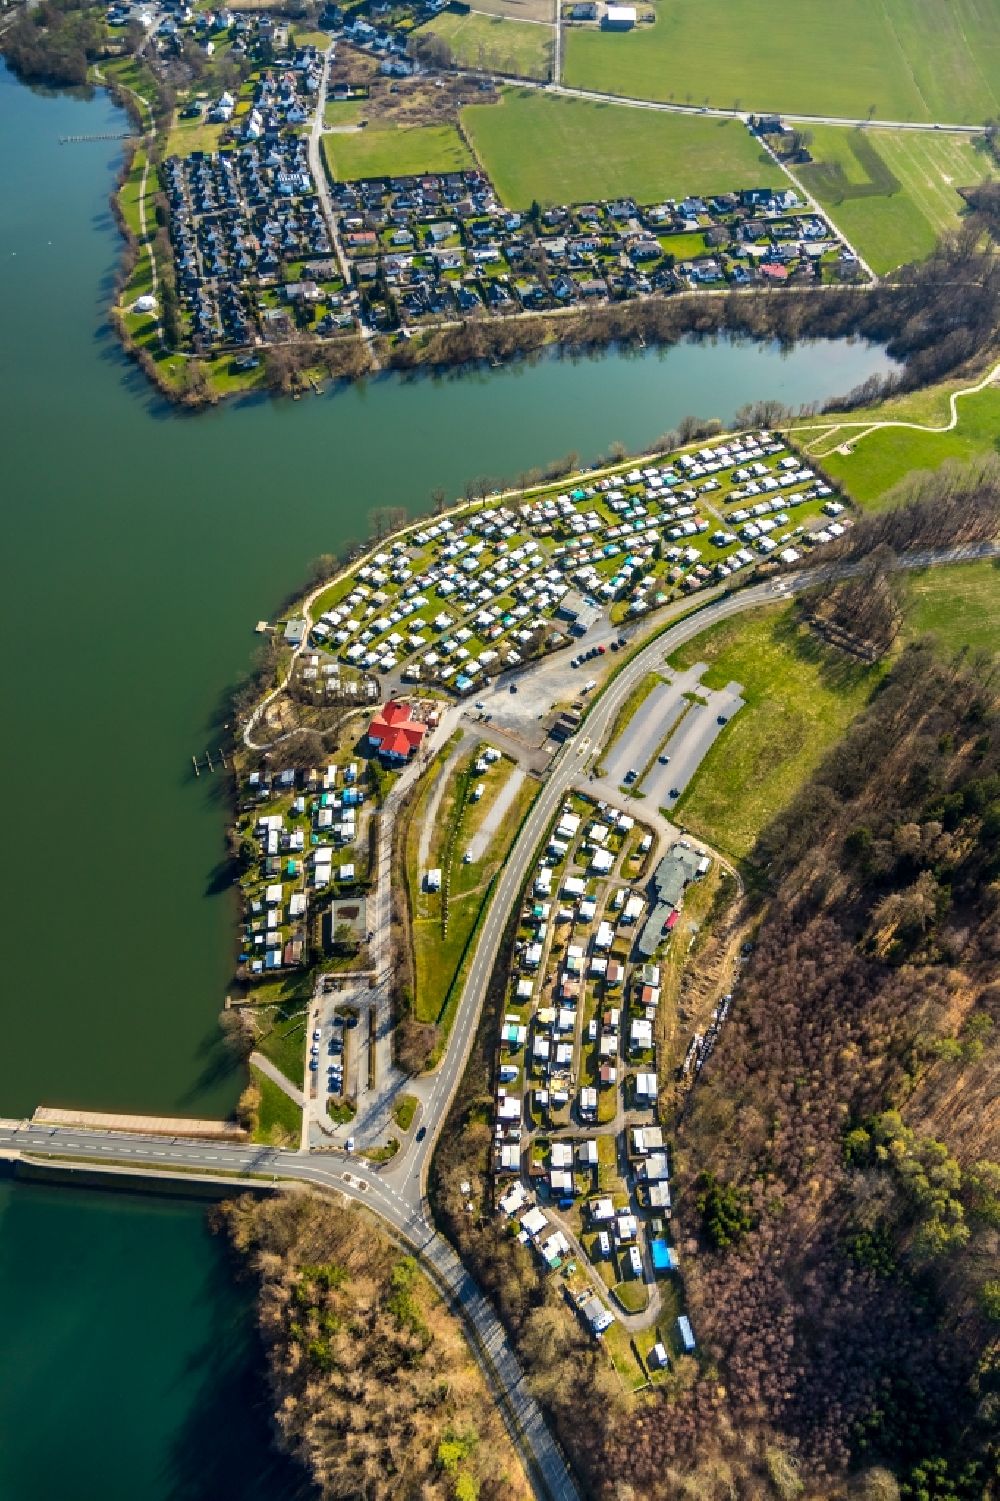 Sundern (Sauerland) from the bird's eye view: Camping with caravans and tents in the district Amecke in Sundern (Sauerland) in the state North Rhine-Westphalia, Germany